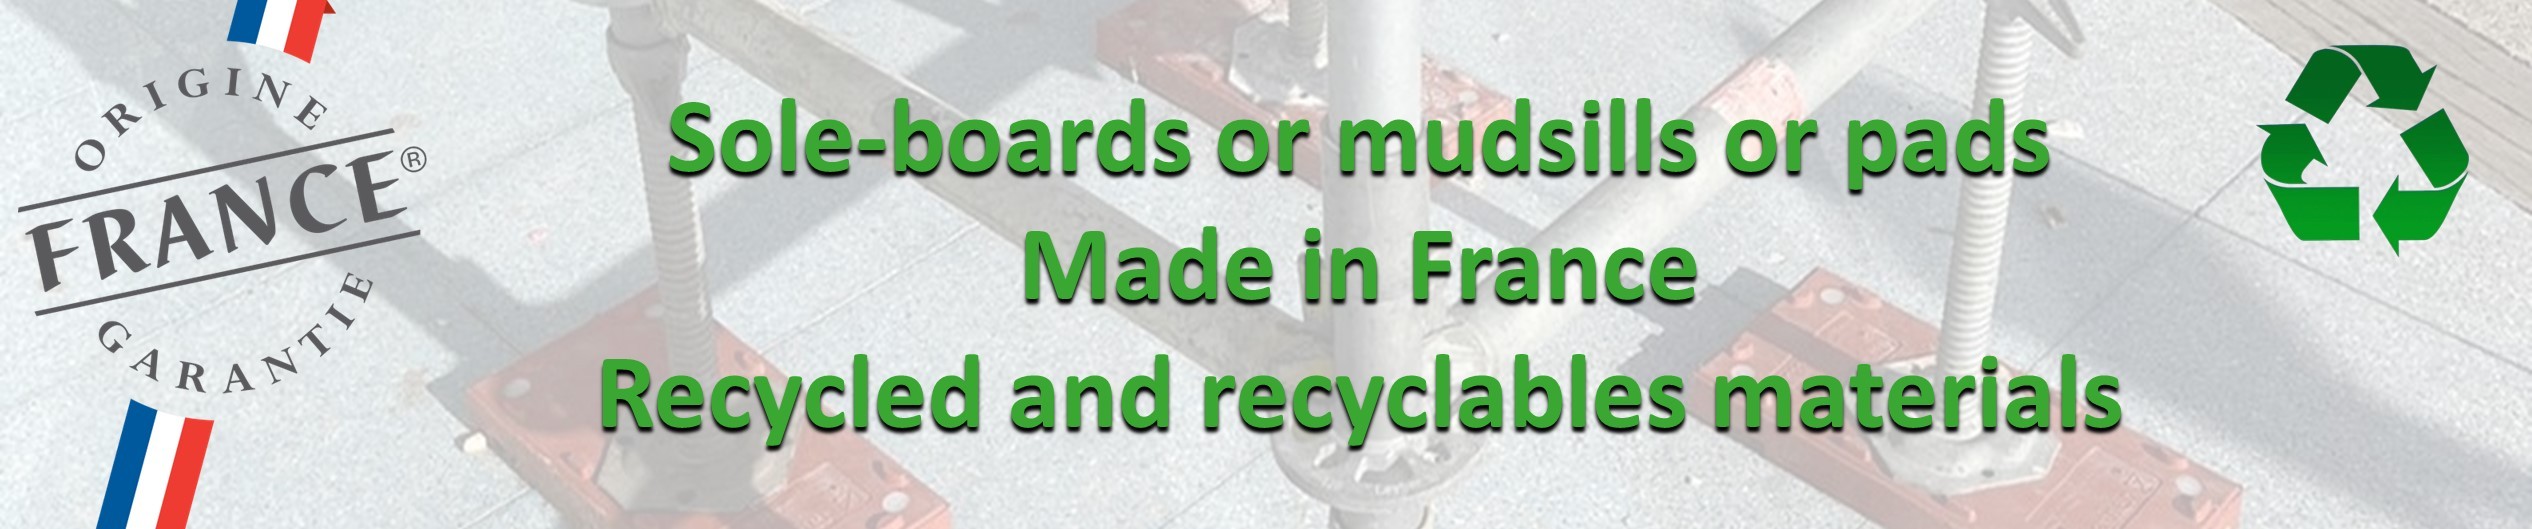 Sole-boards or mudsill, made in France, Recycled and recyclable plastics